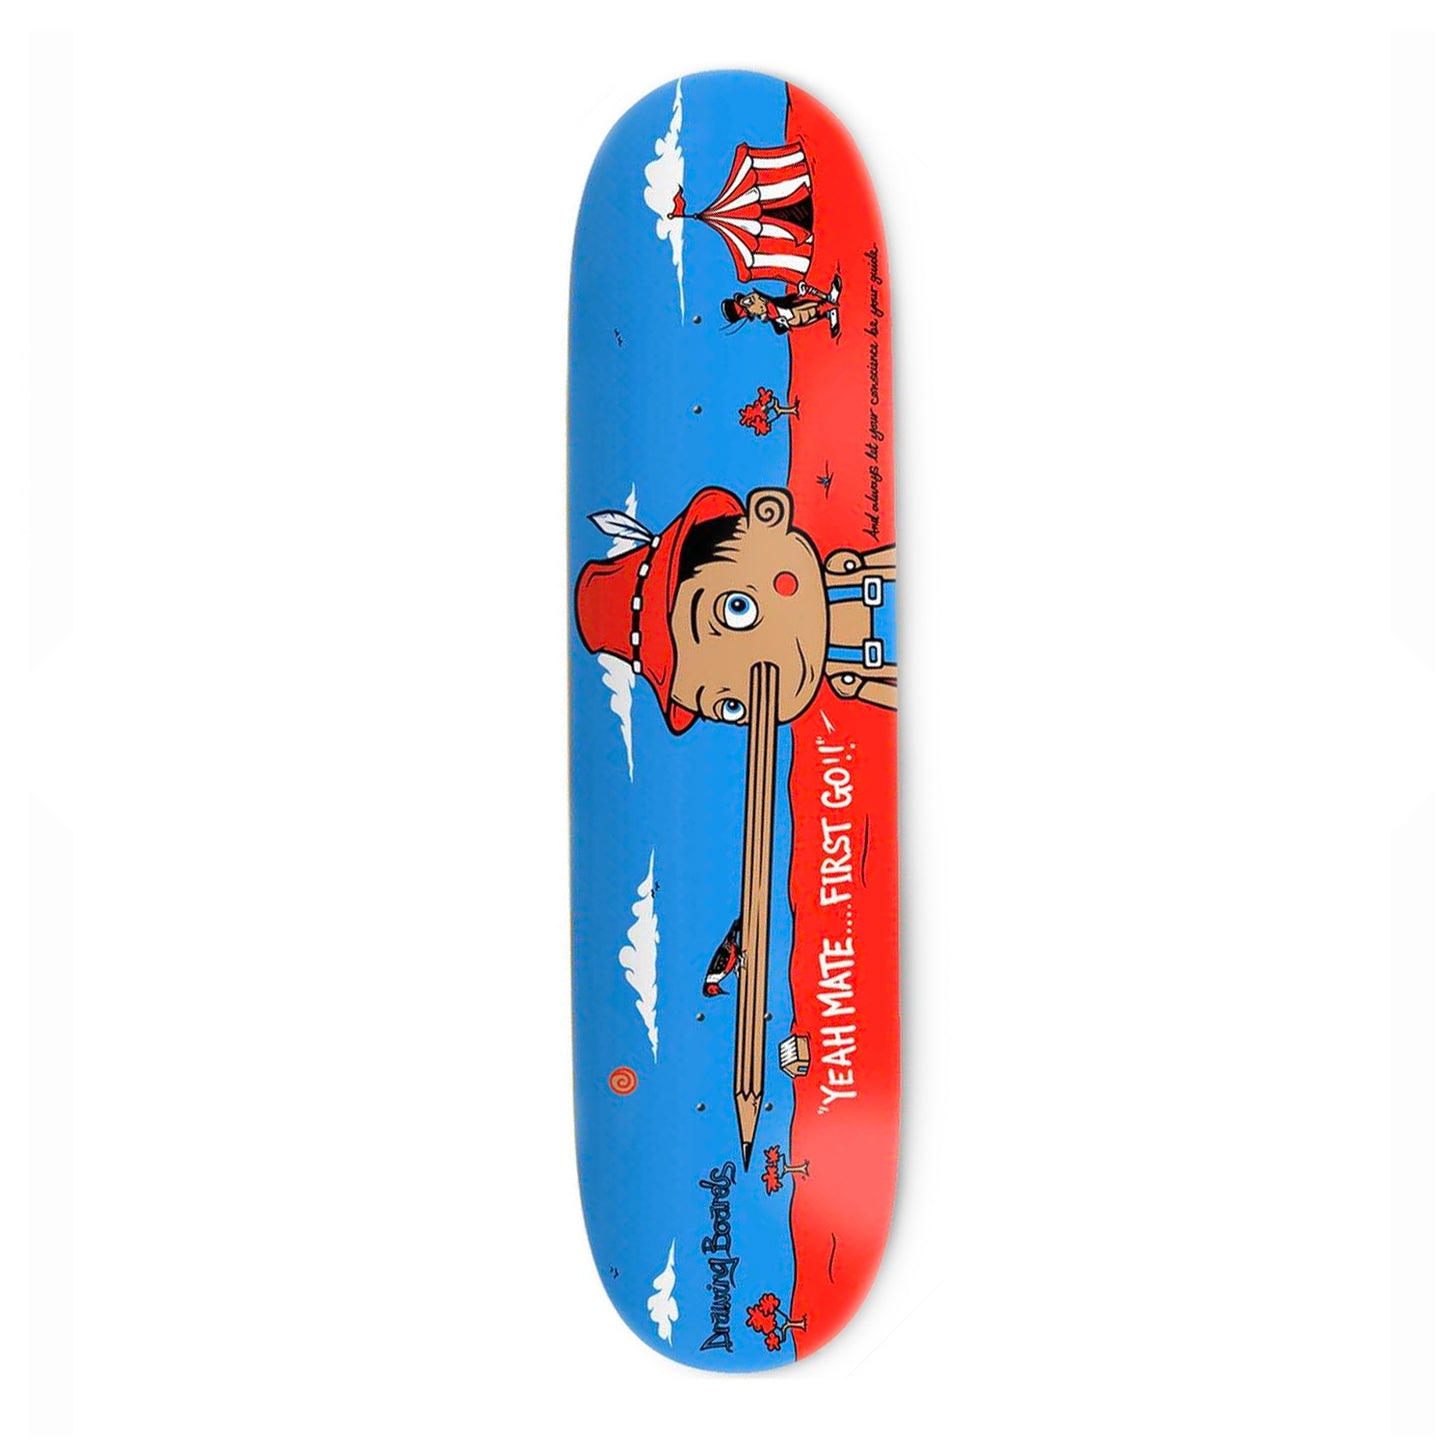 The Drawing Boards - 8.25" - Pinnochio Deck - Prime Delux Store